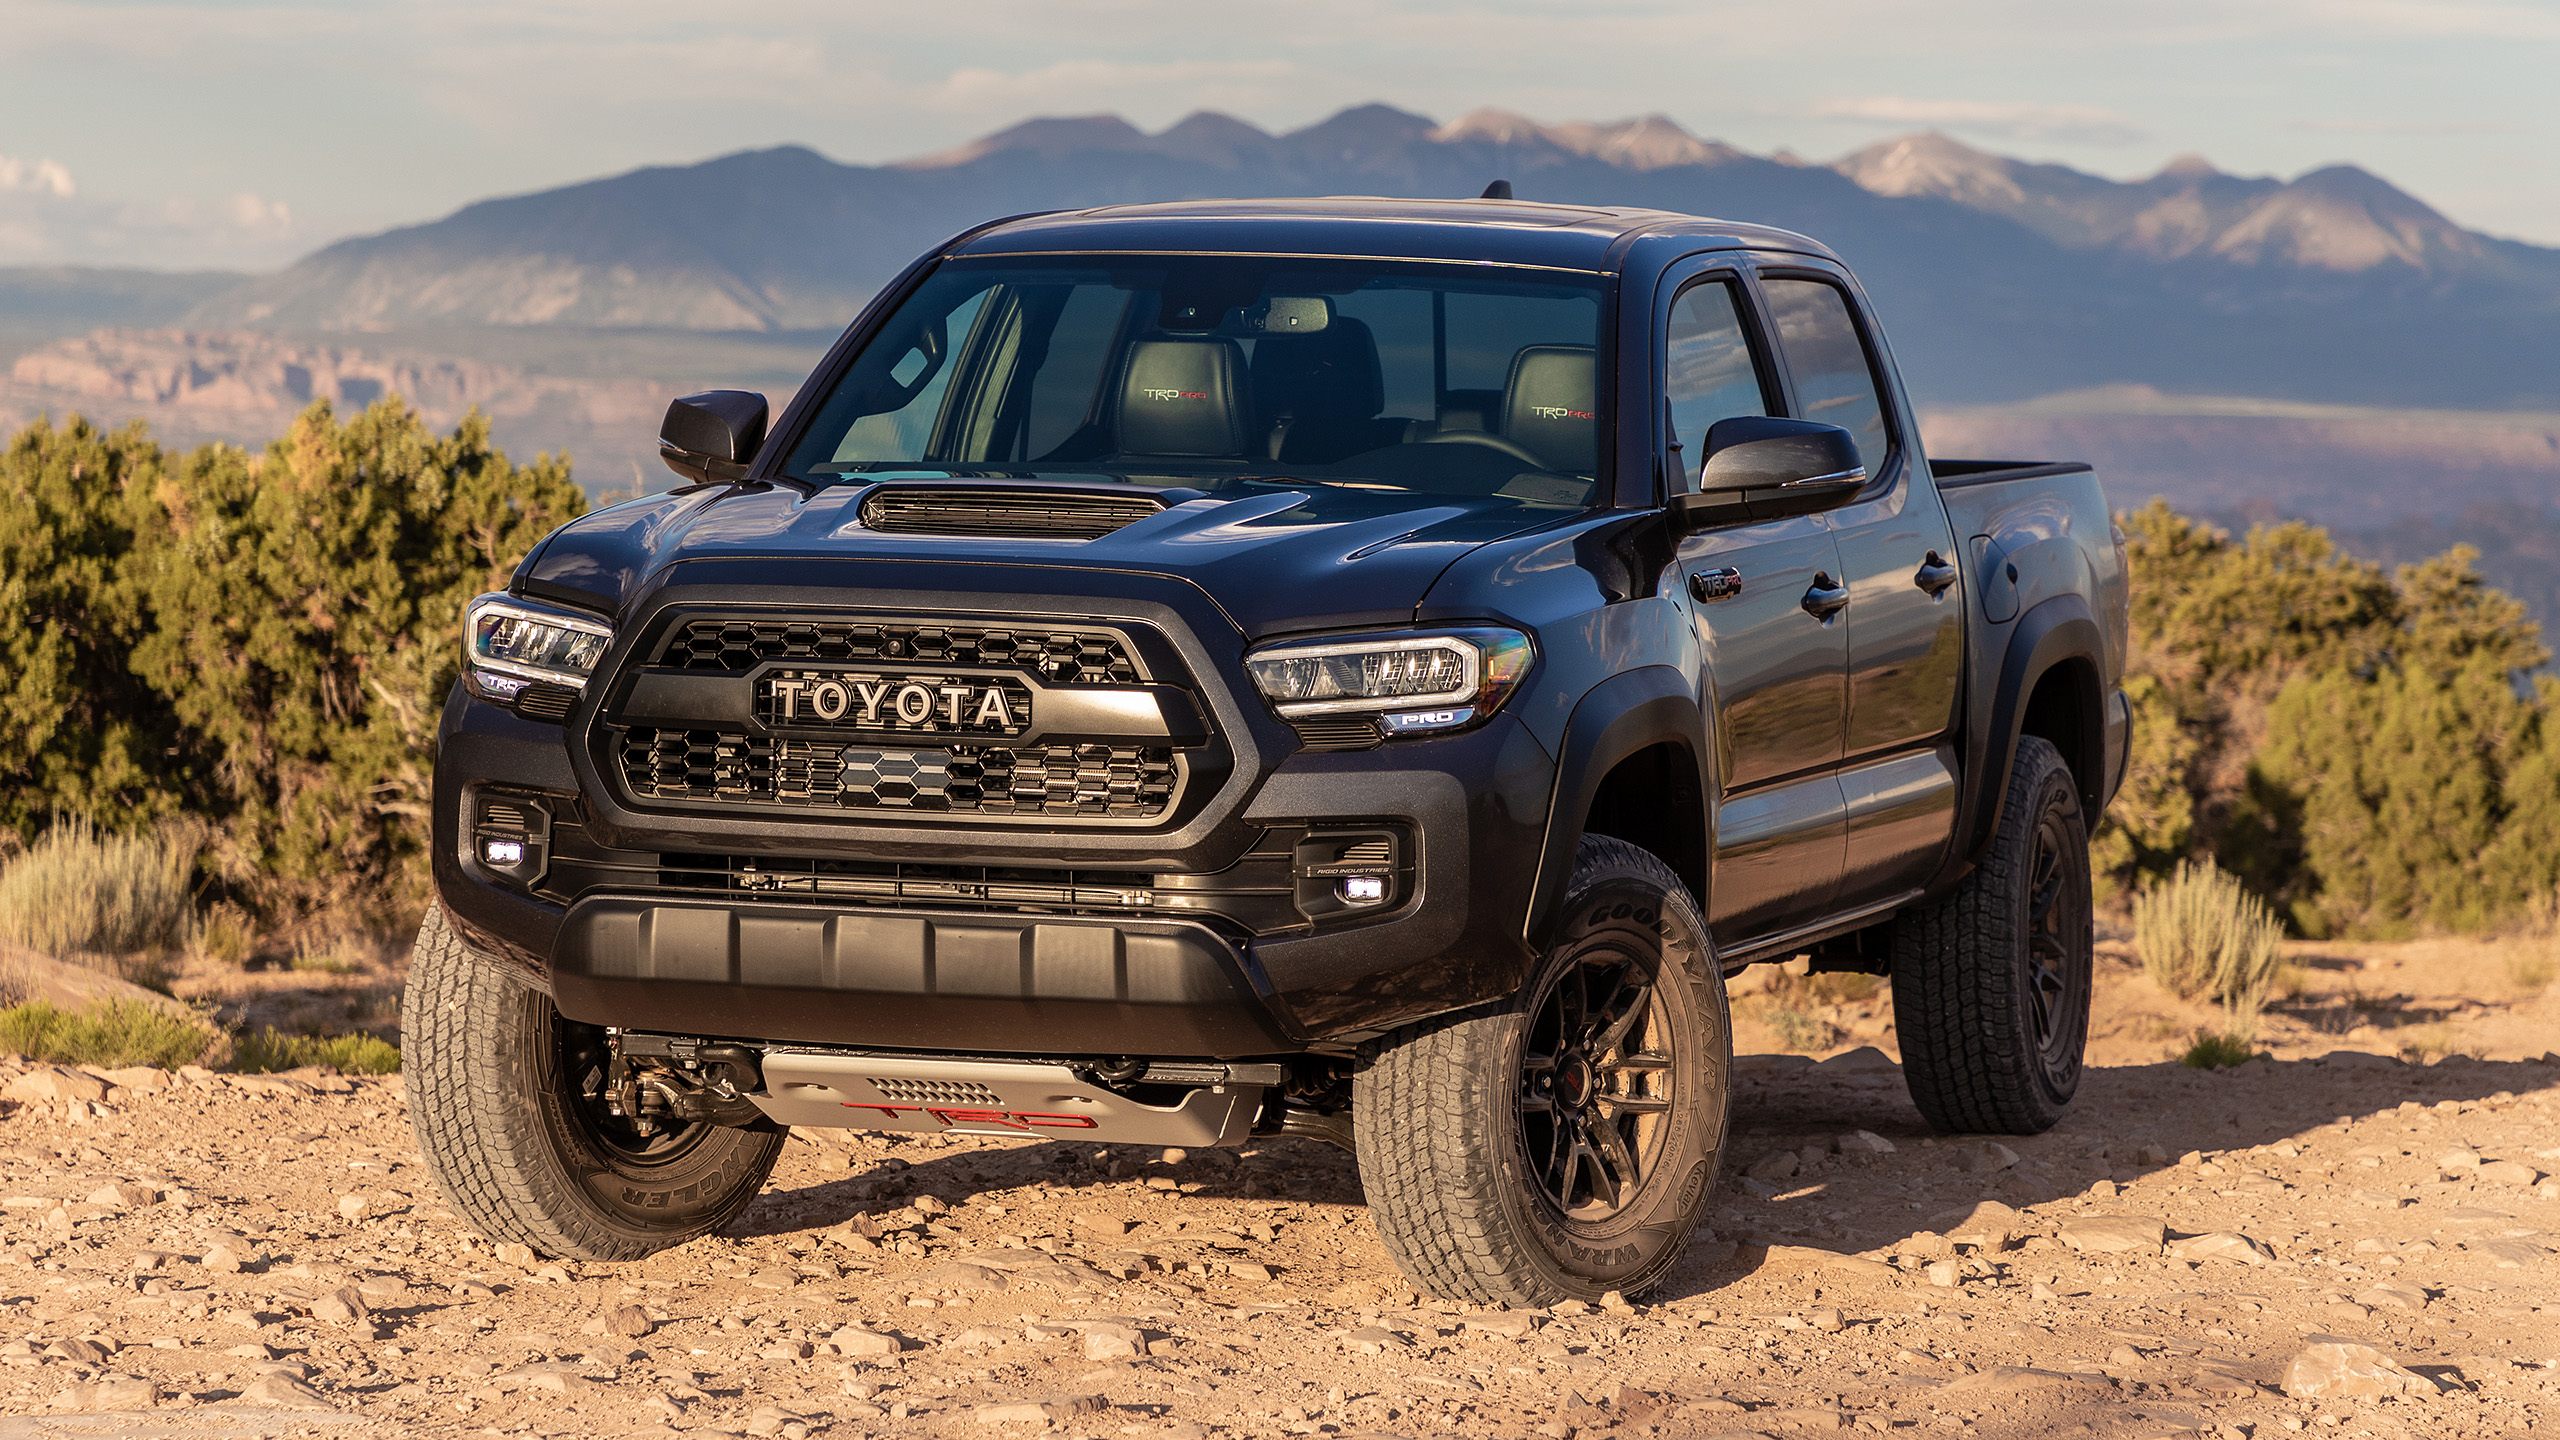 2560x1440 10+ Toyota Tacoma HD Wallpapers and Backgrounds